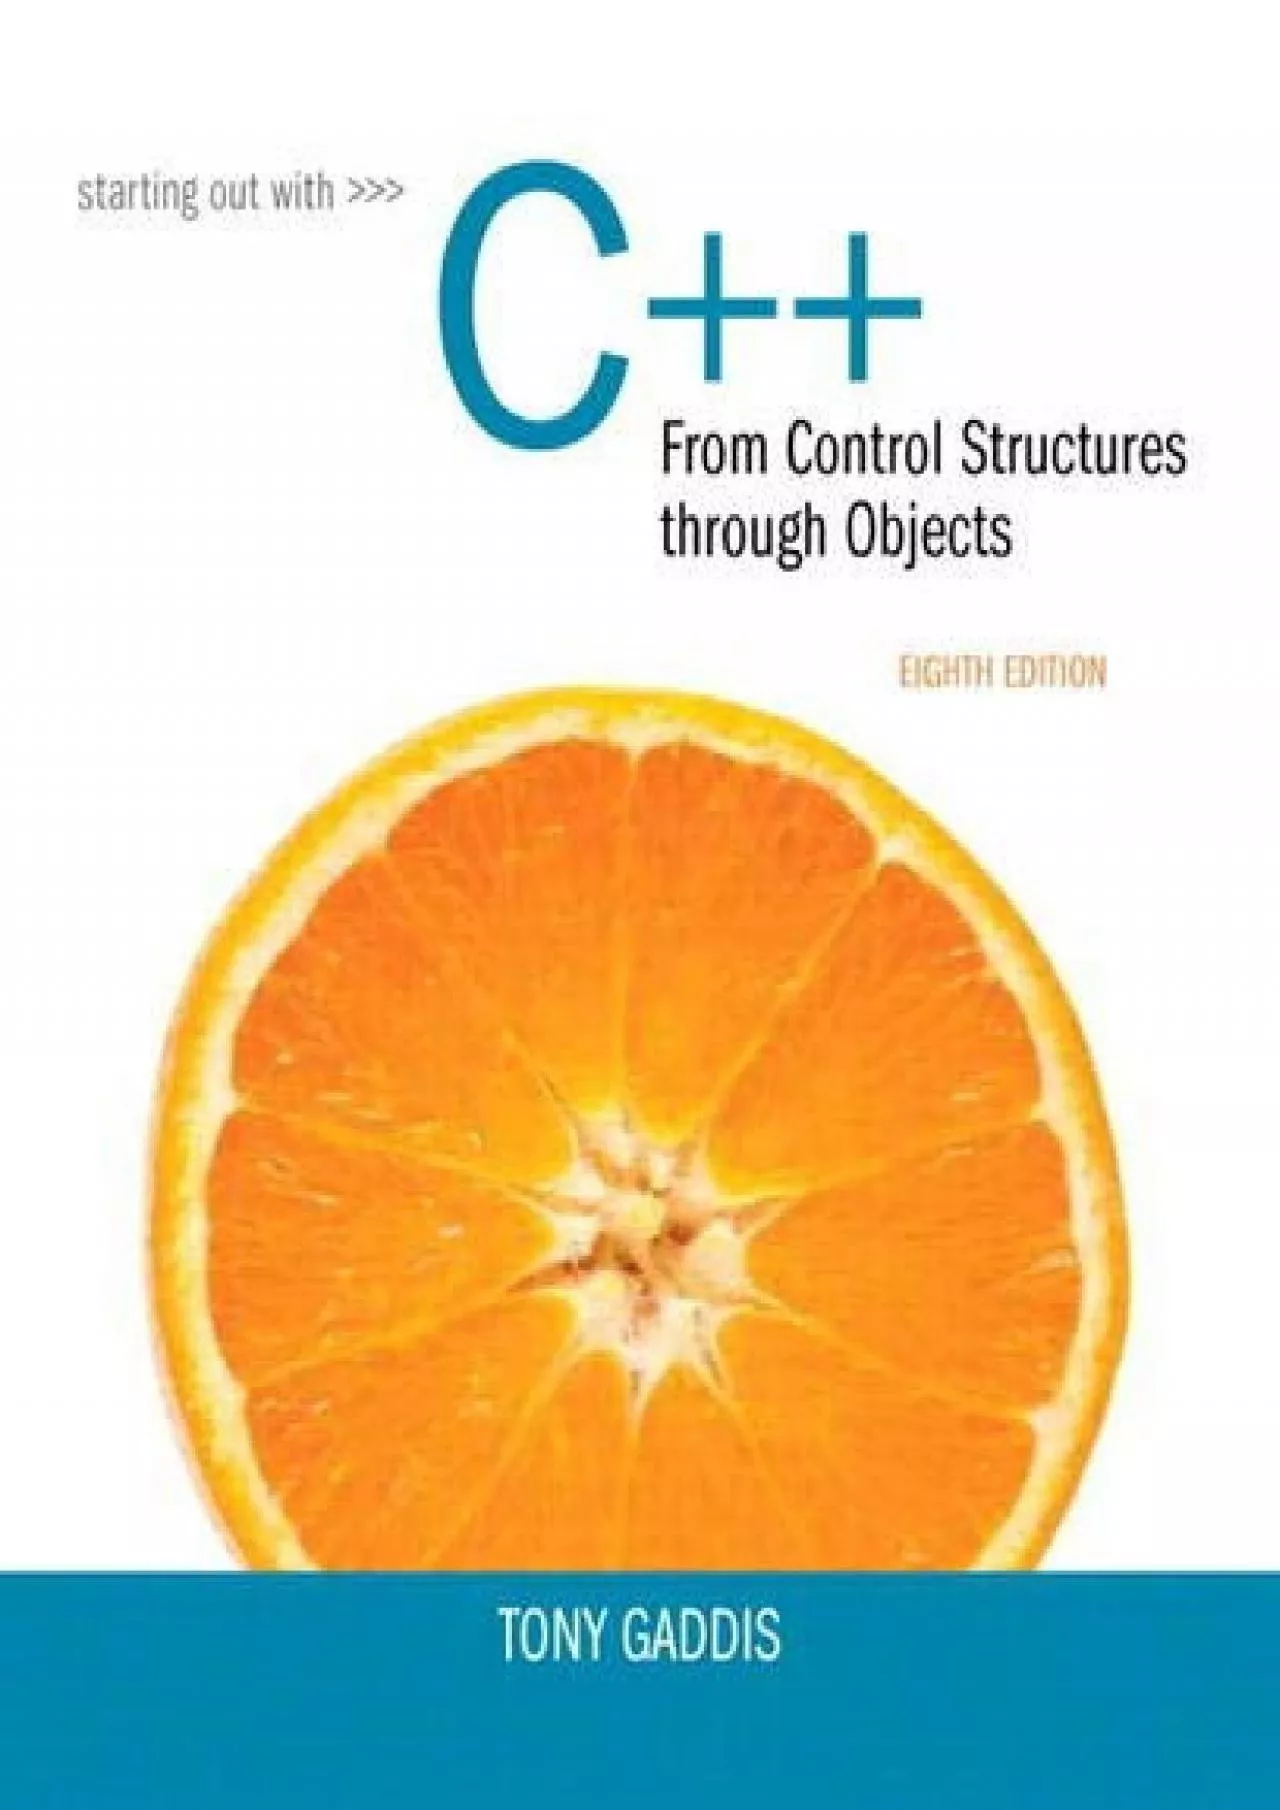 [FREE]-Starting Out with C++ from Control Structures to Objects (8th Edition)